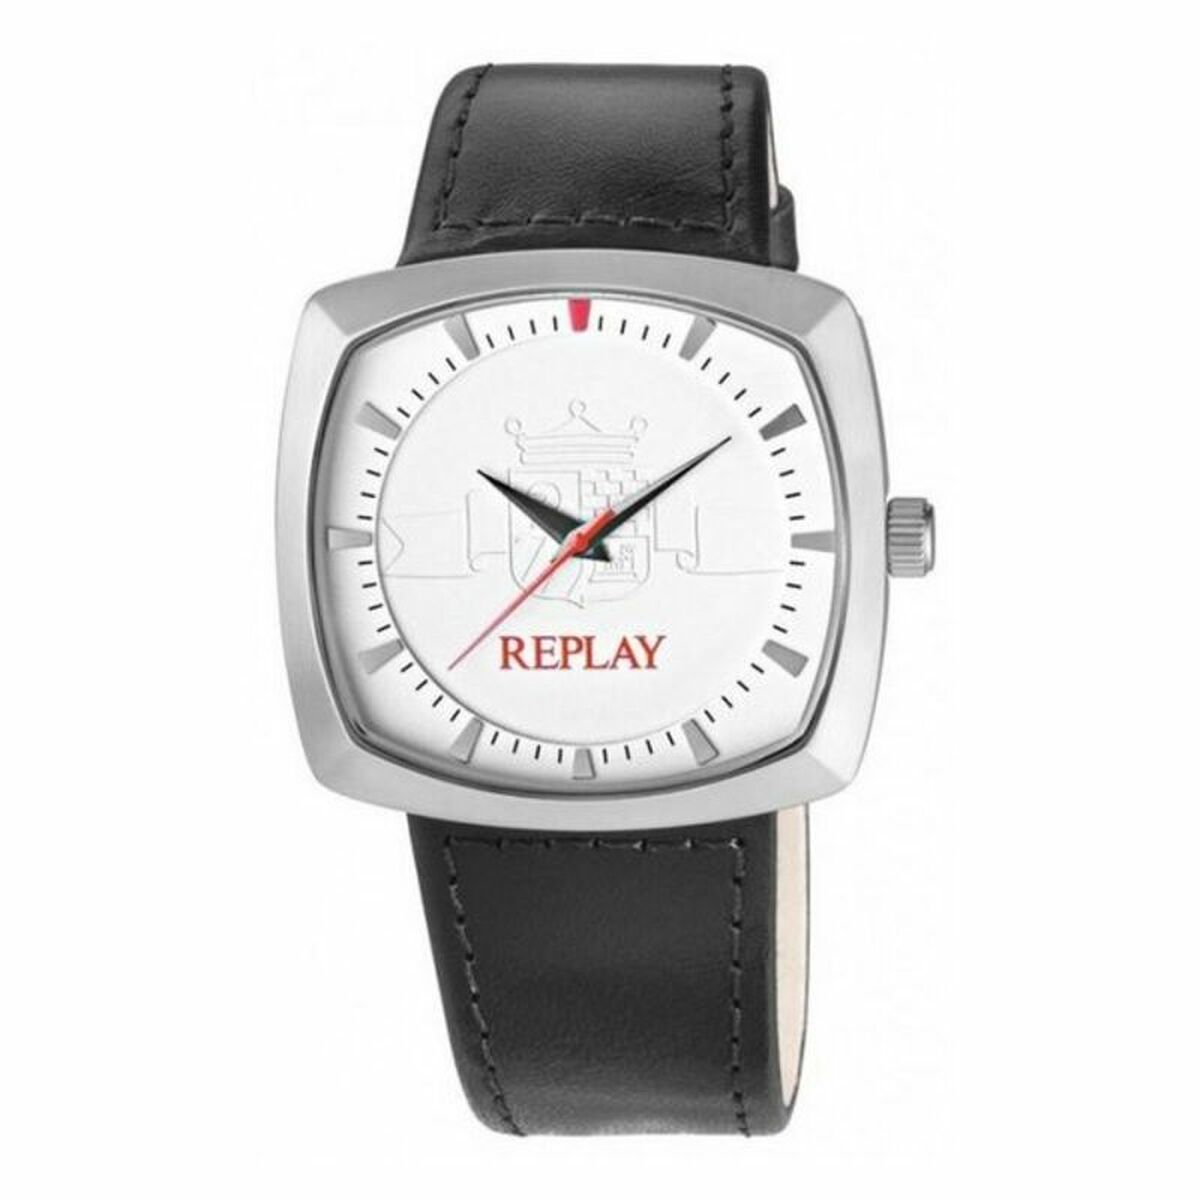 Ladies'Watch Replay RW5401AH1 (Ø 34 mm), Replay, Watches, Women, ladieswatch-replay-rw5401ah1-o-34-mm, : Quartz Movement, Brand_Replay, category-reference-2570, category-reference-2635, category-reference-2995, category-reference-t-19667, category-reference-t-19725, Condition_NEW, fashion, gifts for women, original gifts, Price_50 - 100, RiotNook